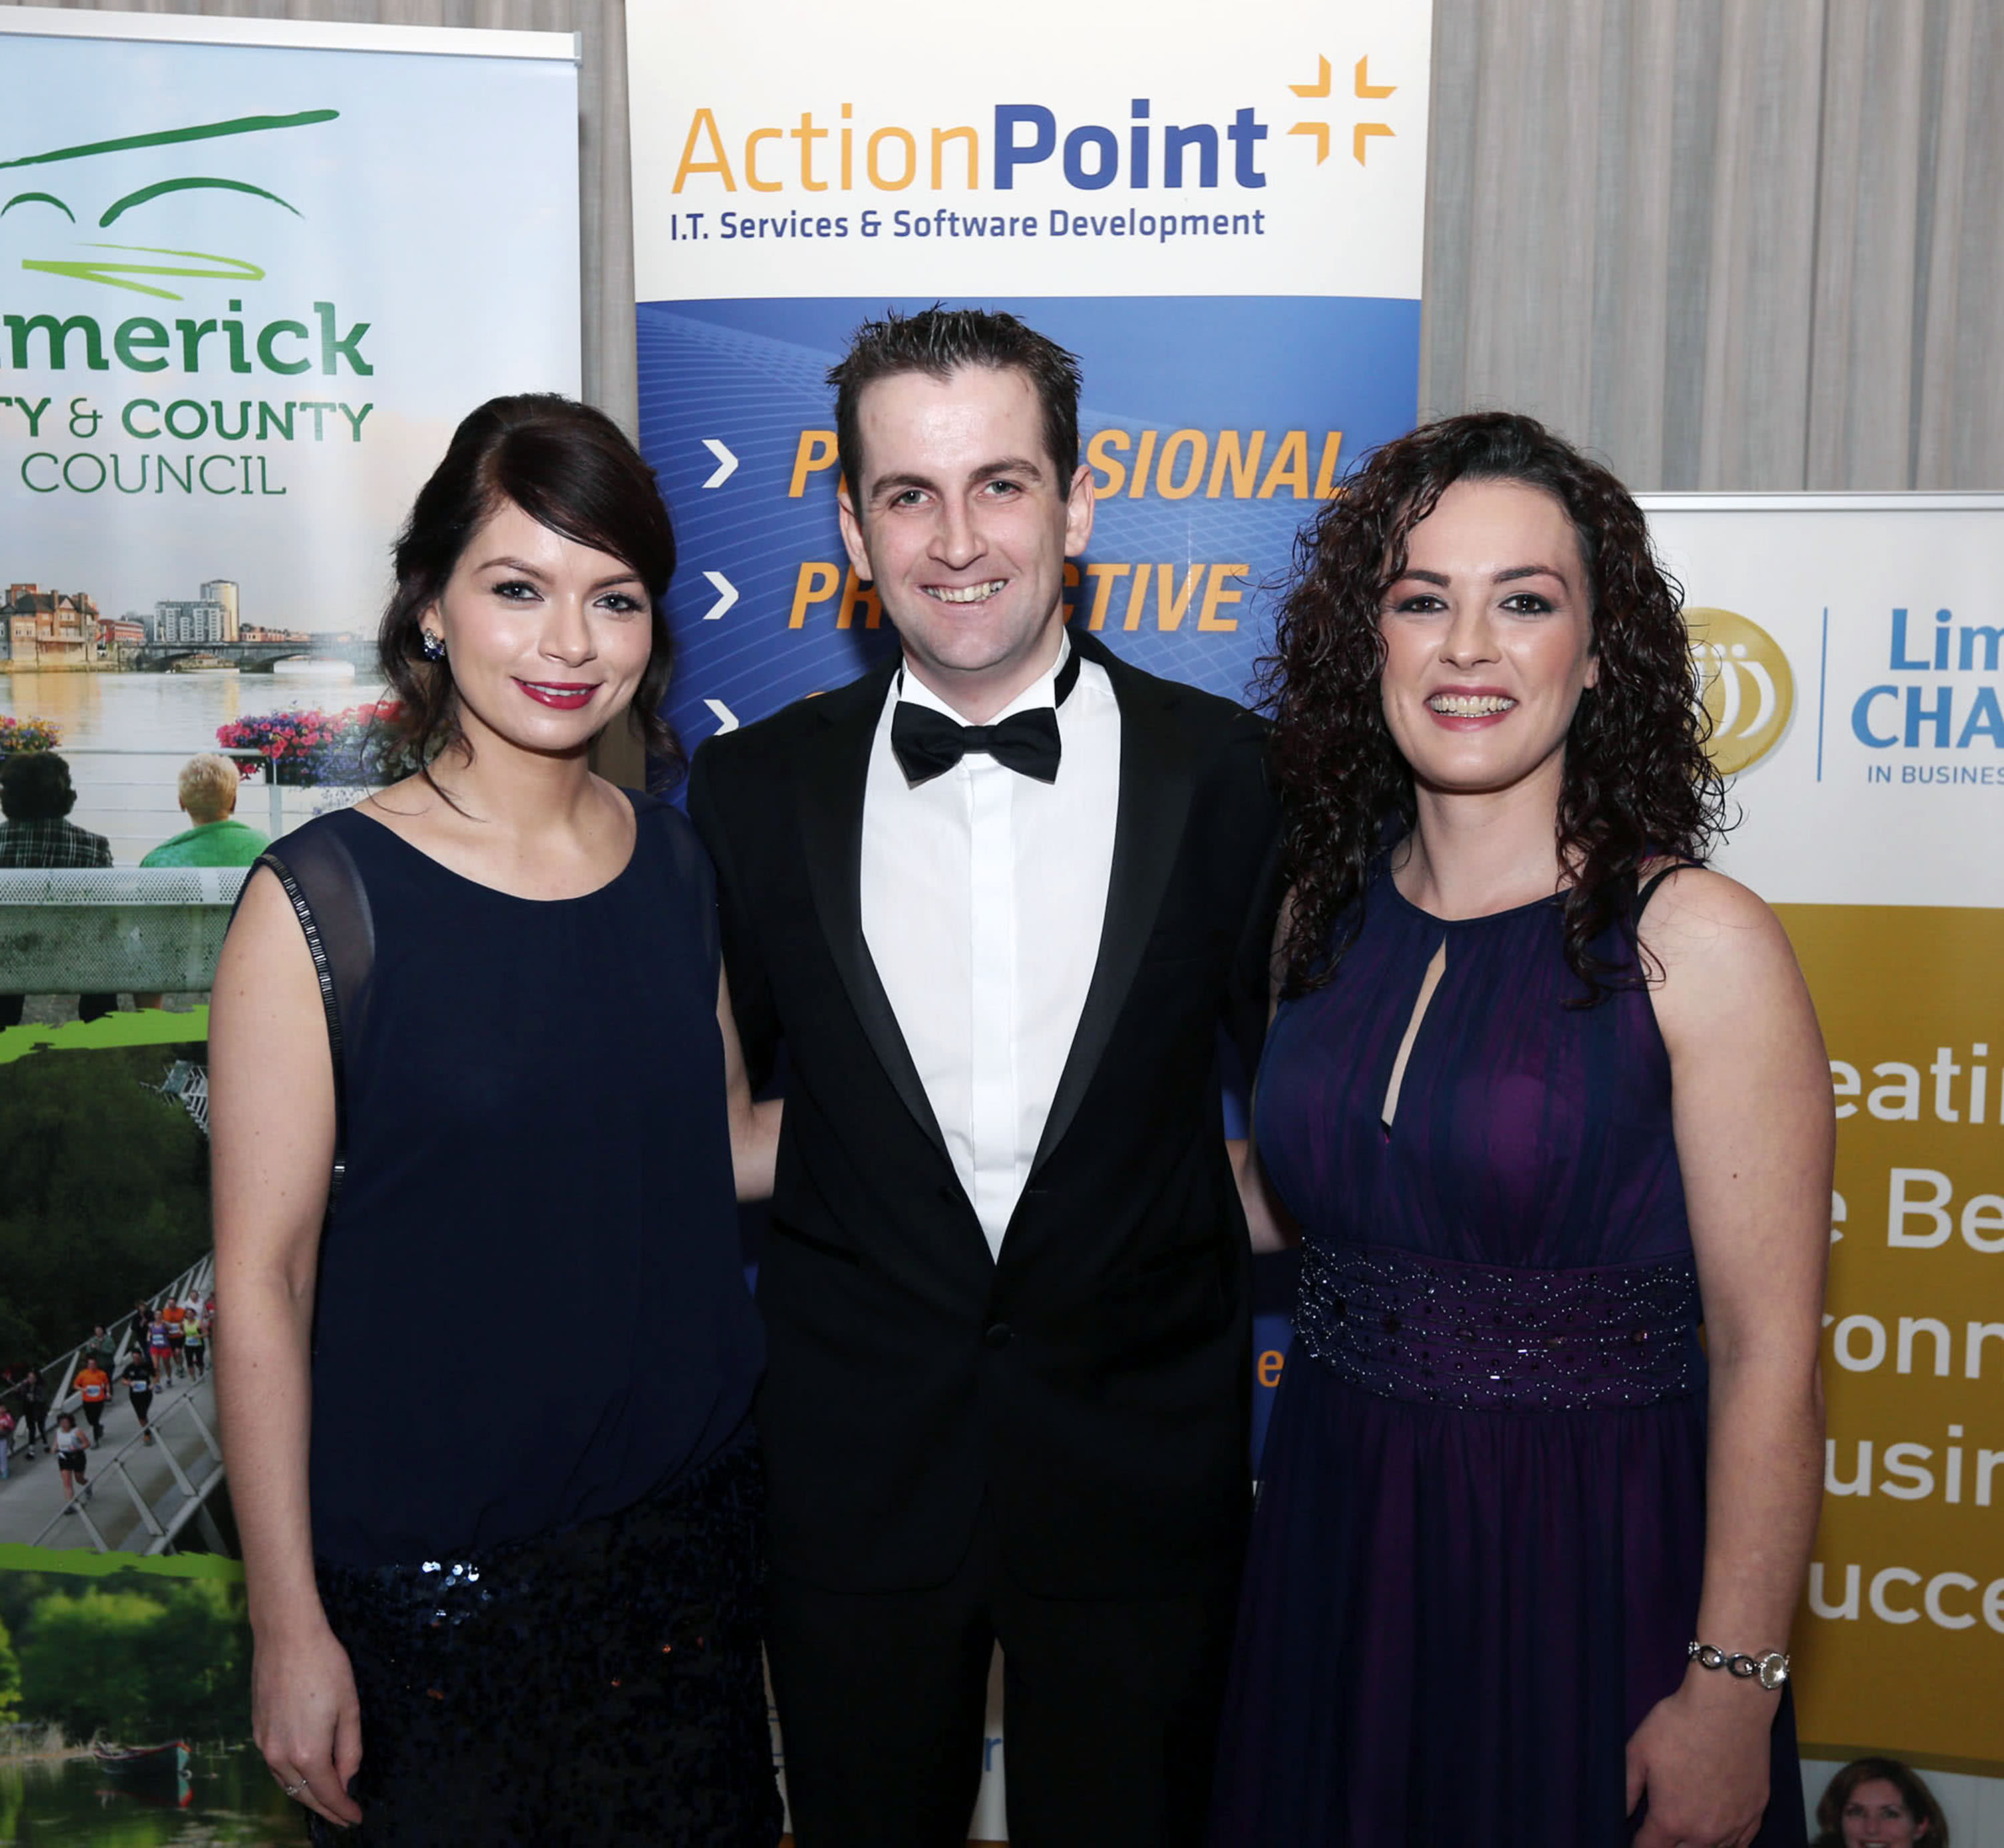 Miriam O'Brien, Marketing Manager, John Savage, Technical Director, Michelle Leo, Head of IT Services, ActionPoint